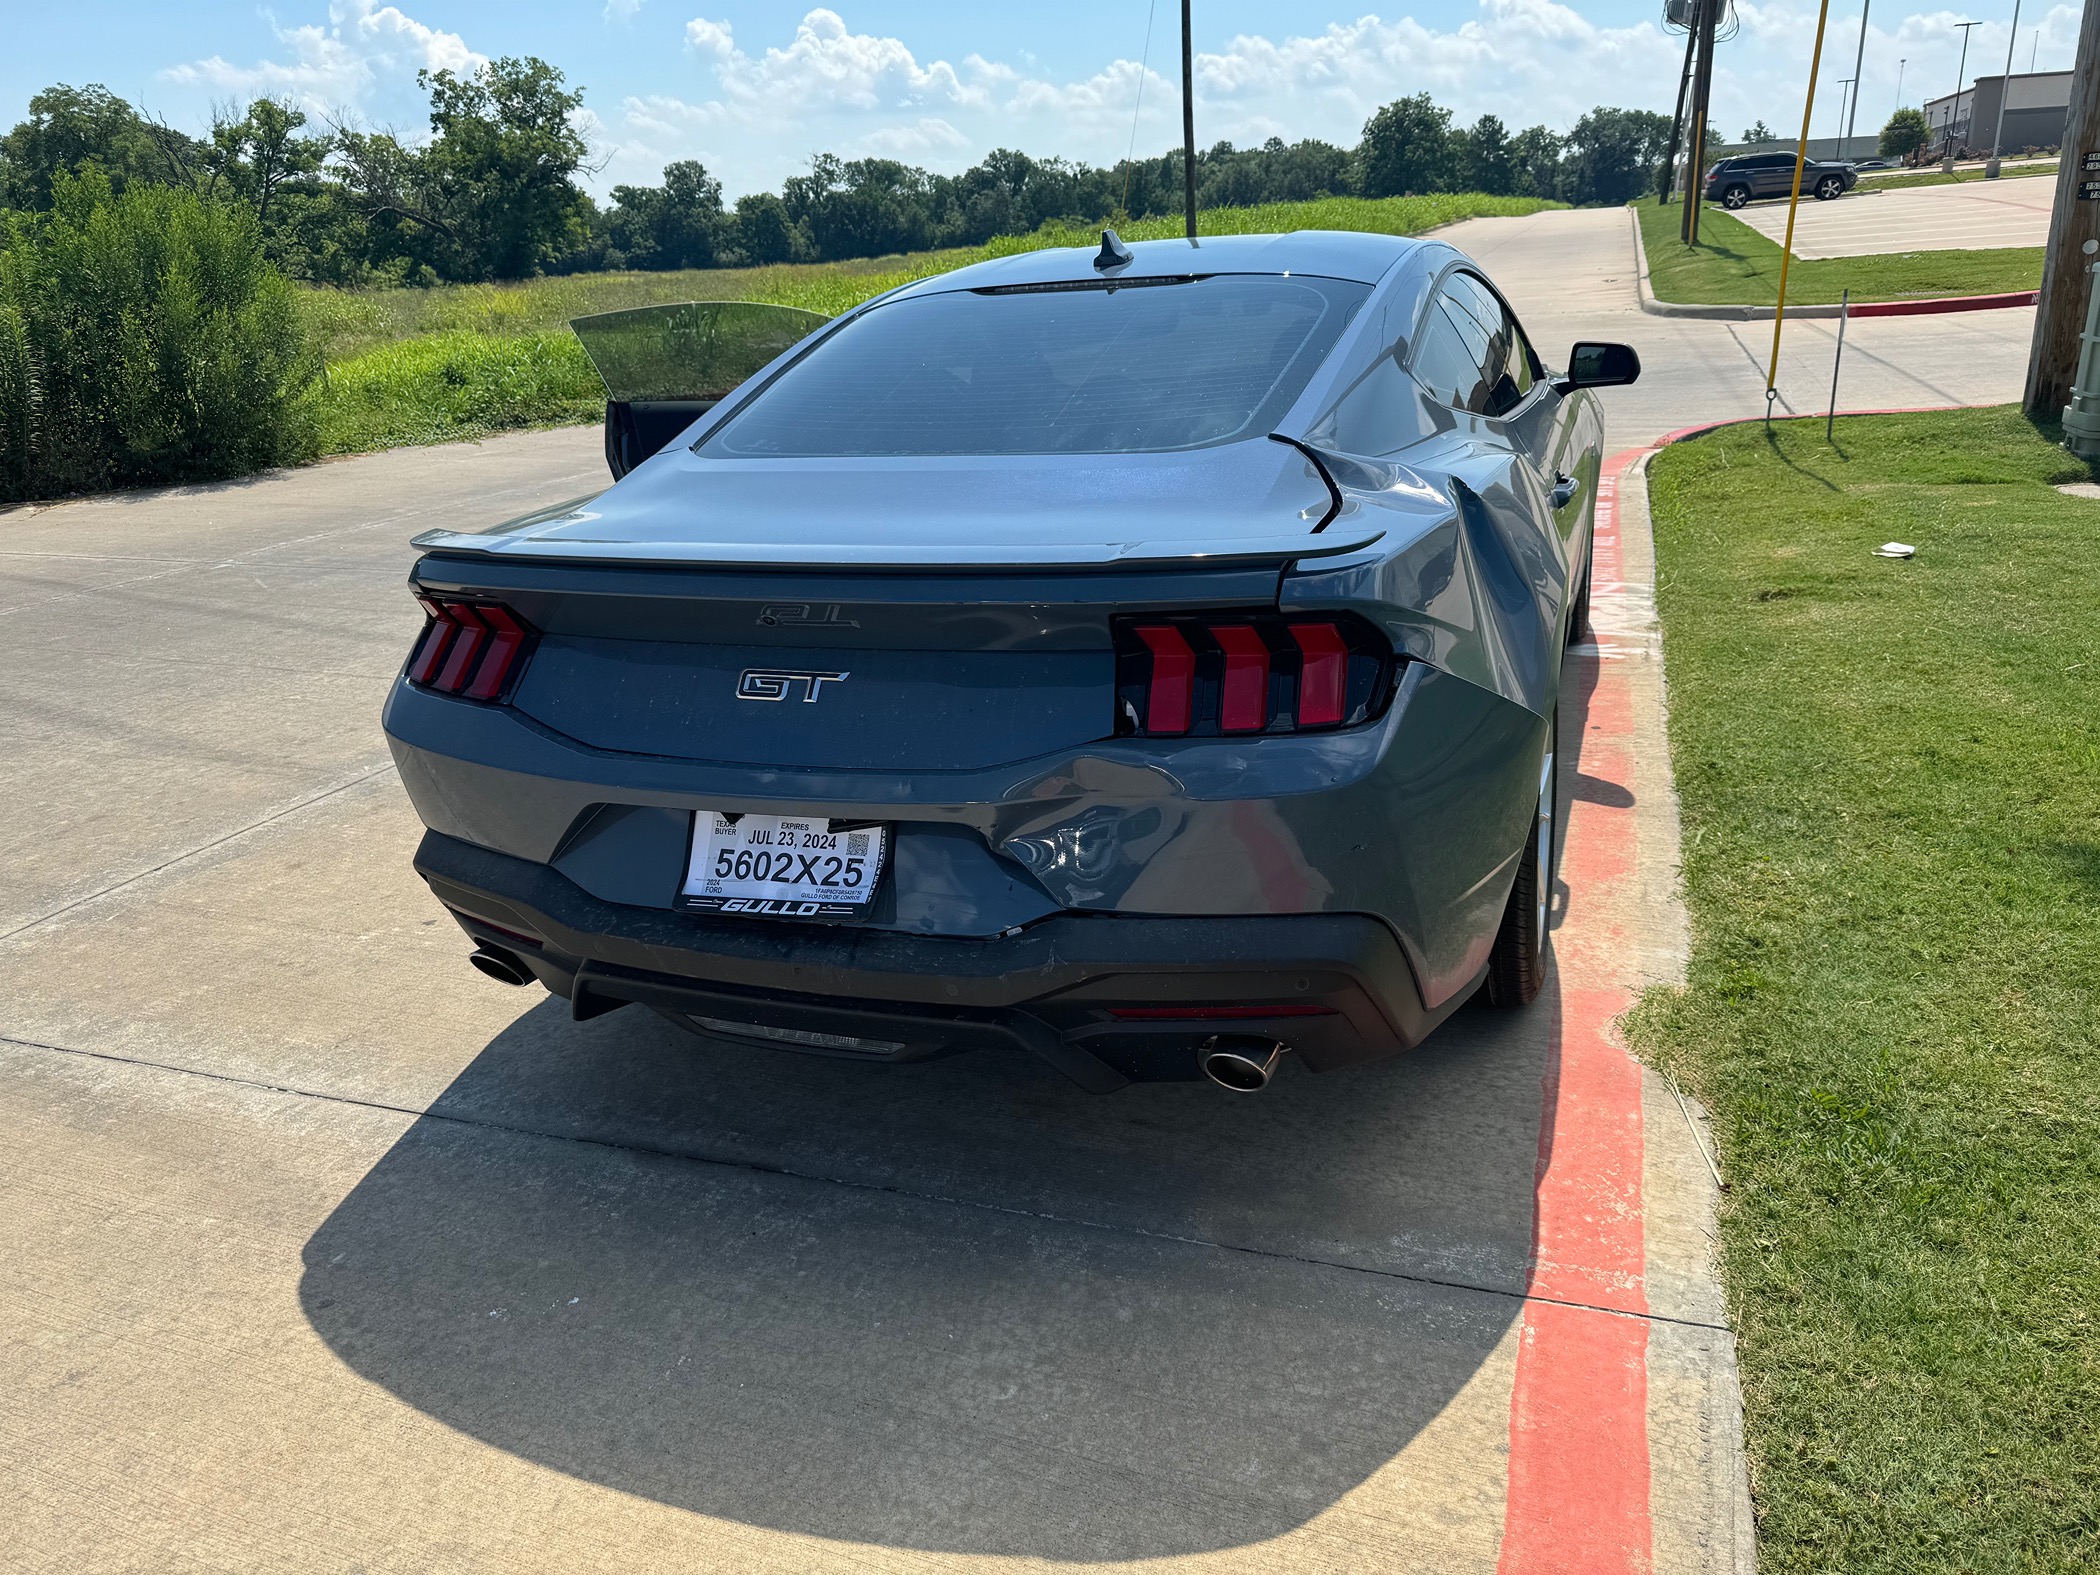 S650 Mustang Rear ended. Frame damage possible IMG_6507